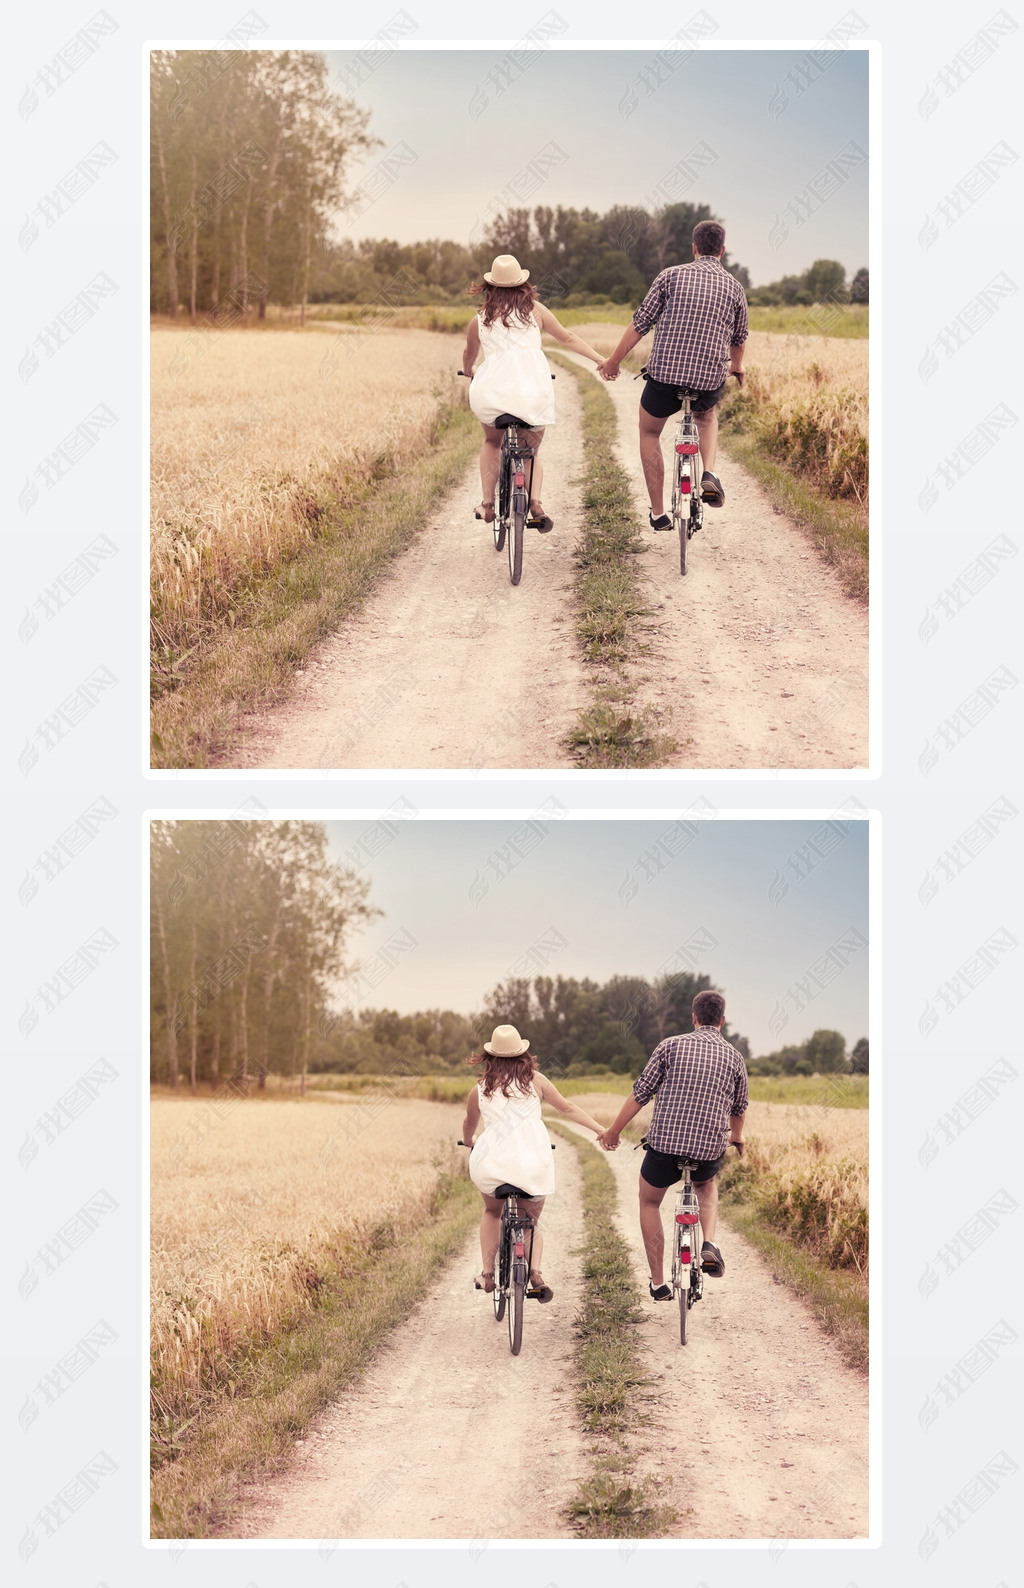 Romantic couple cycling together